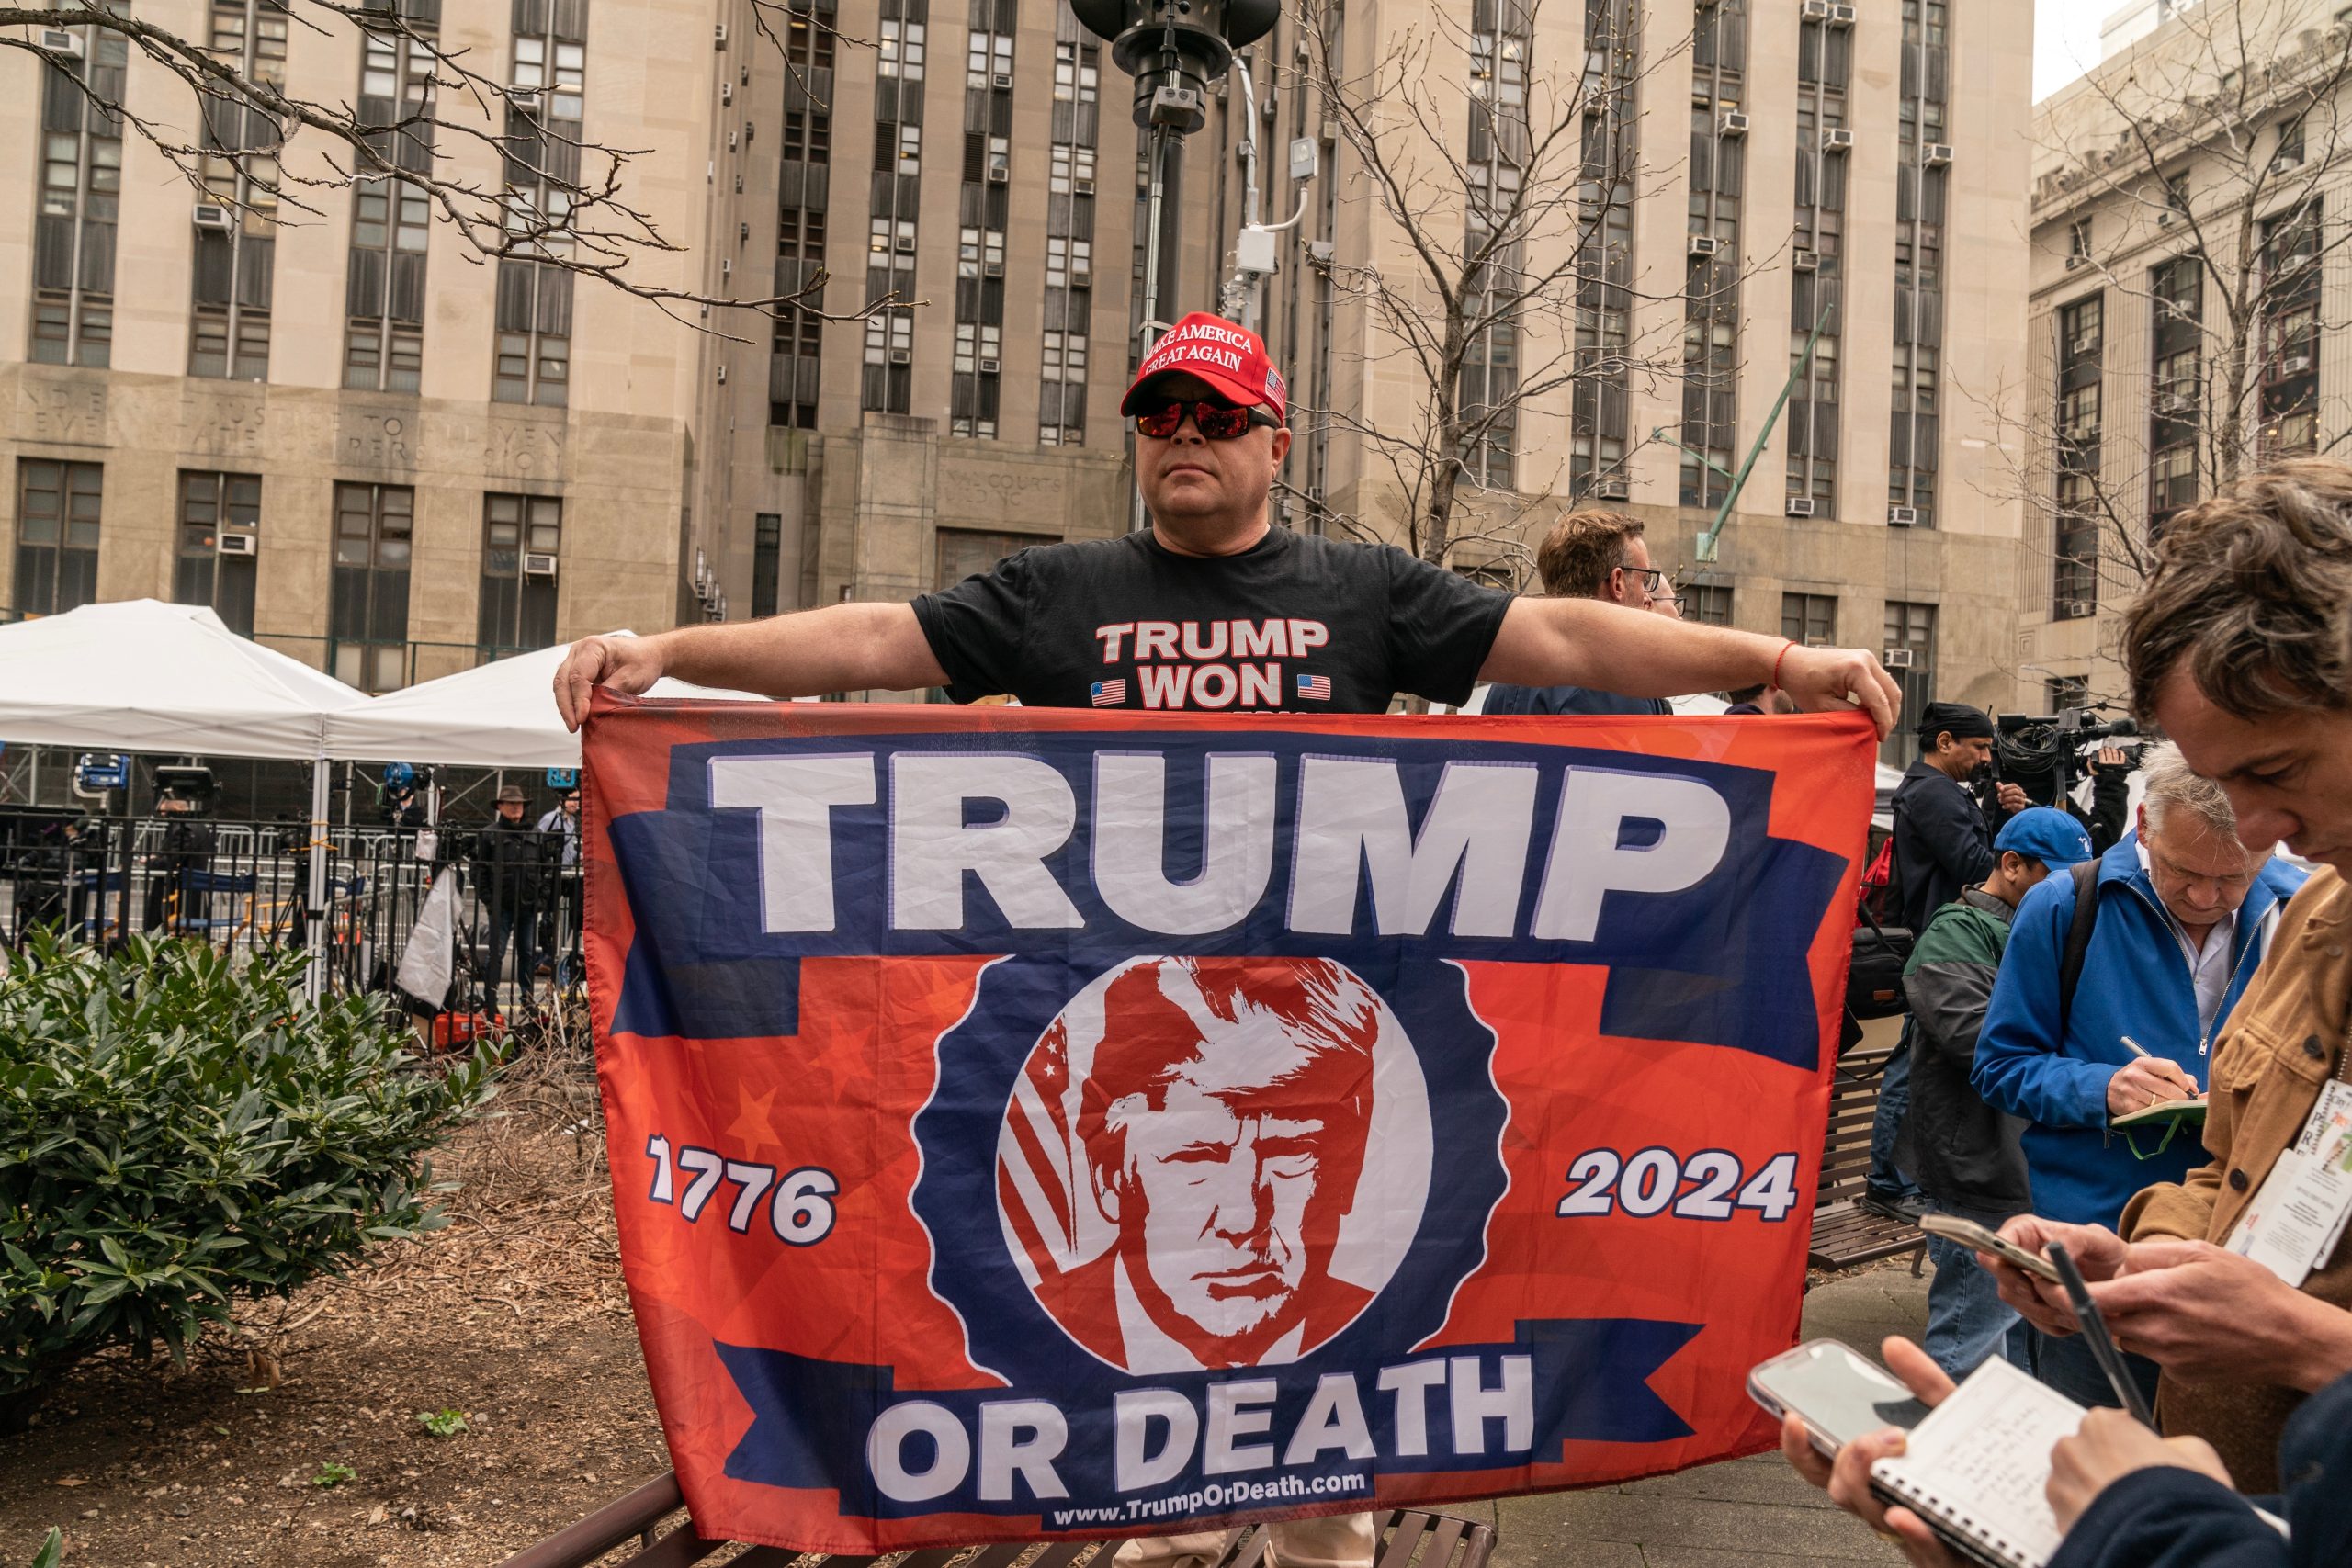 Trump or Death 2024 scaled - Bucks County Beacon - OPINION: In the Congressional Race Between Republican Incumbent Brian Fitzpatrick and Democrat Ashley Ehasz, the Choice Is Between Fascism or Freedom